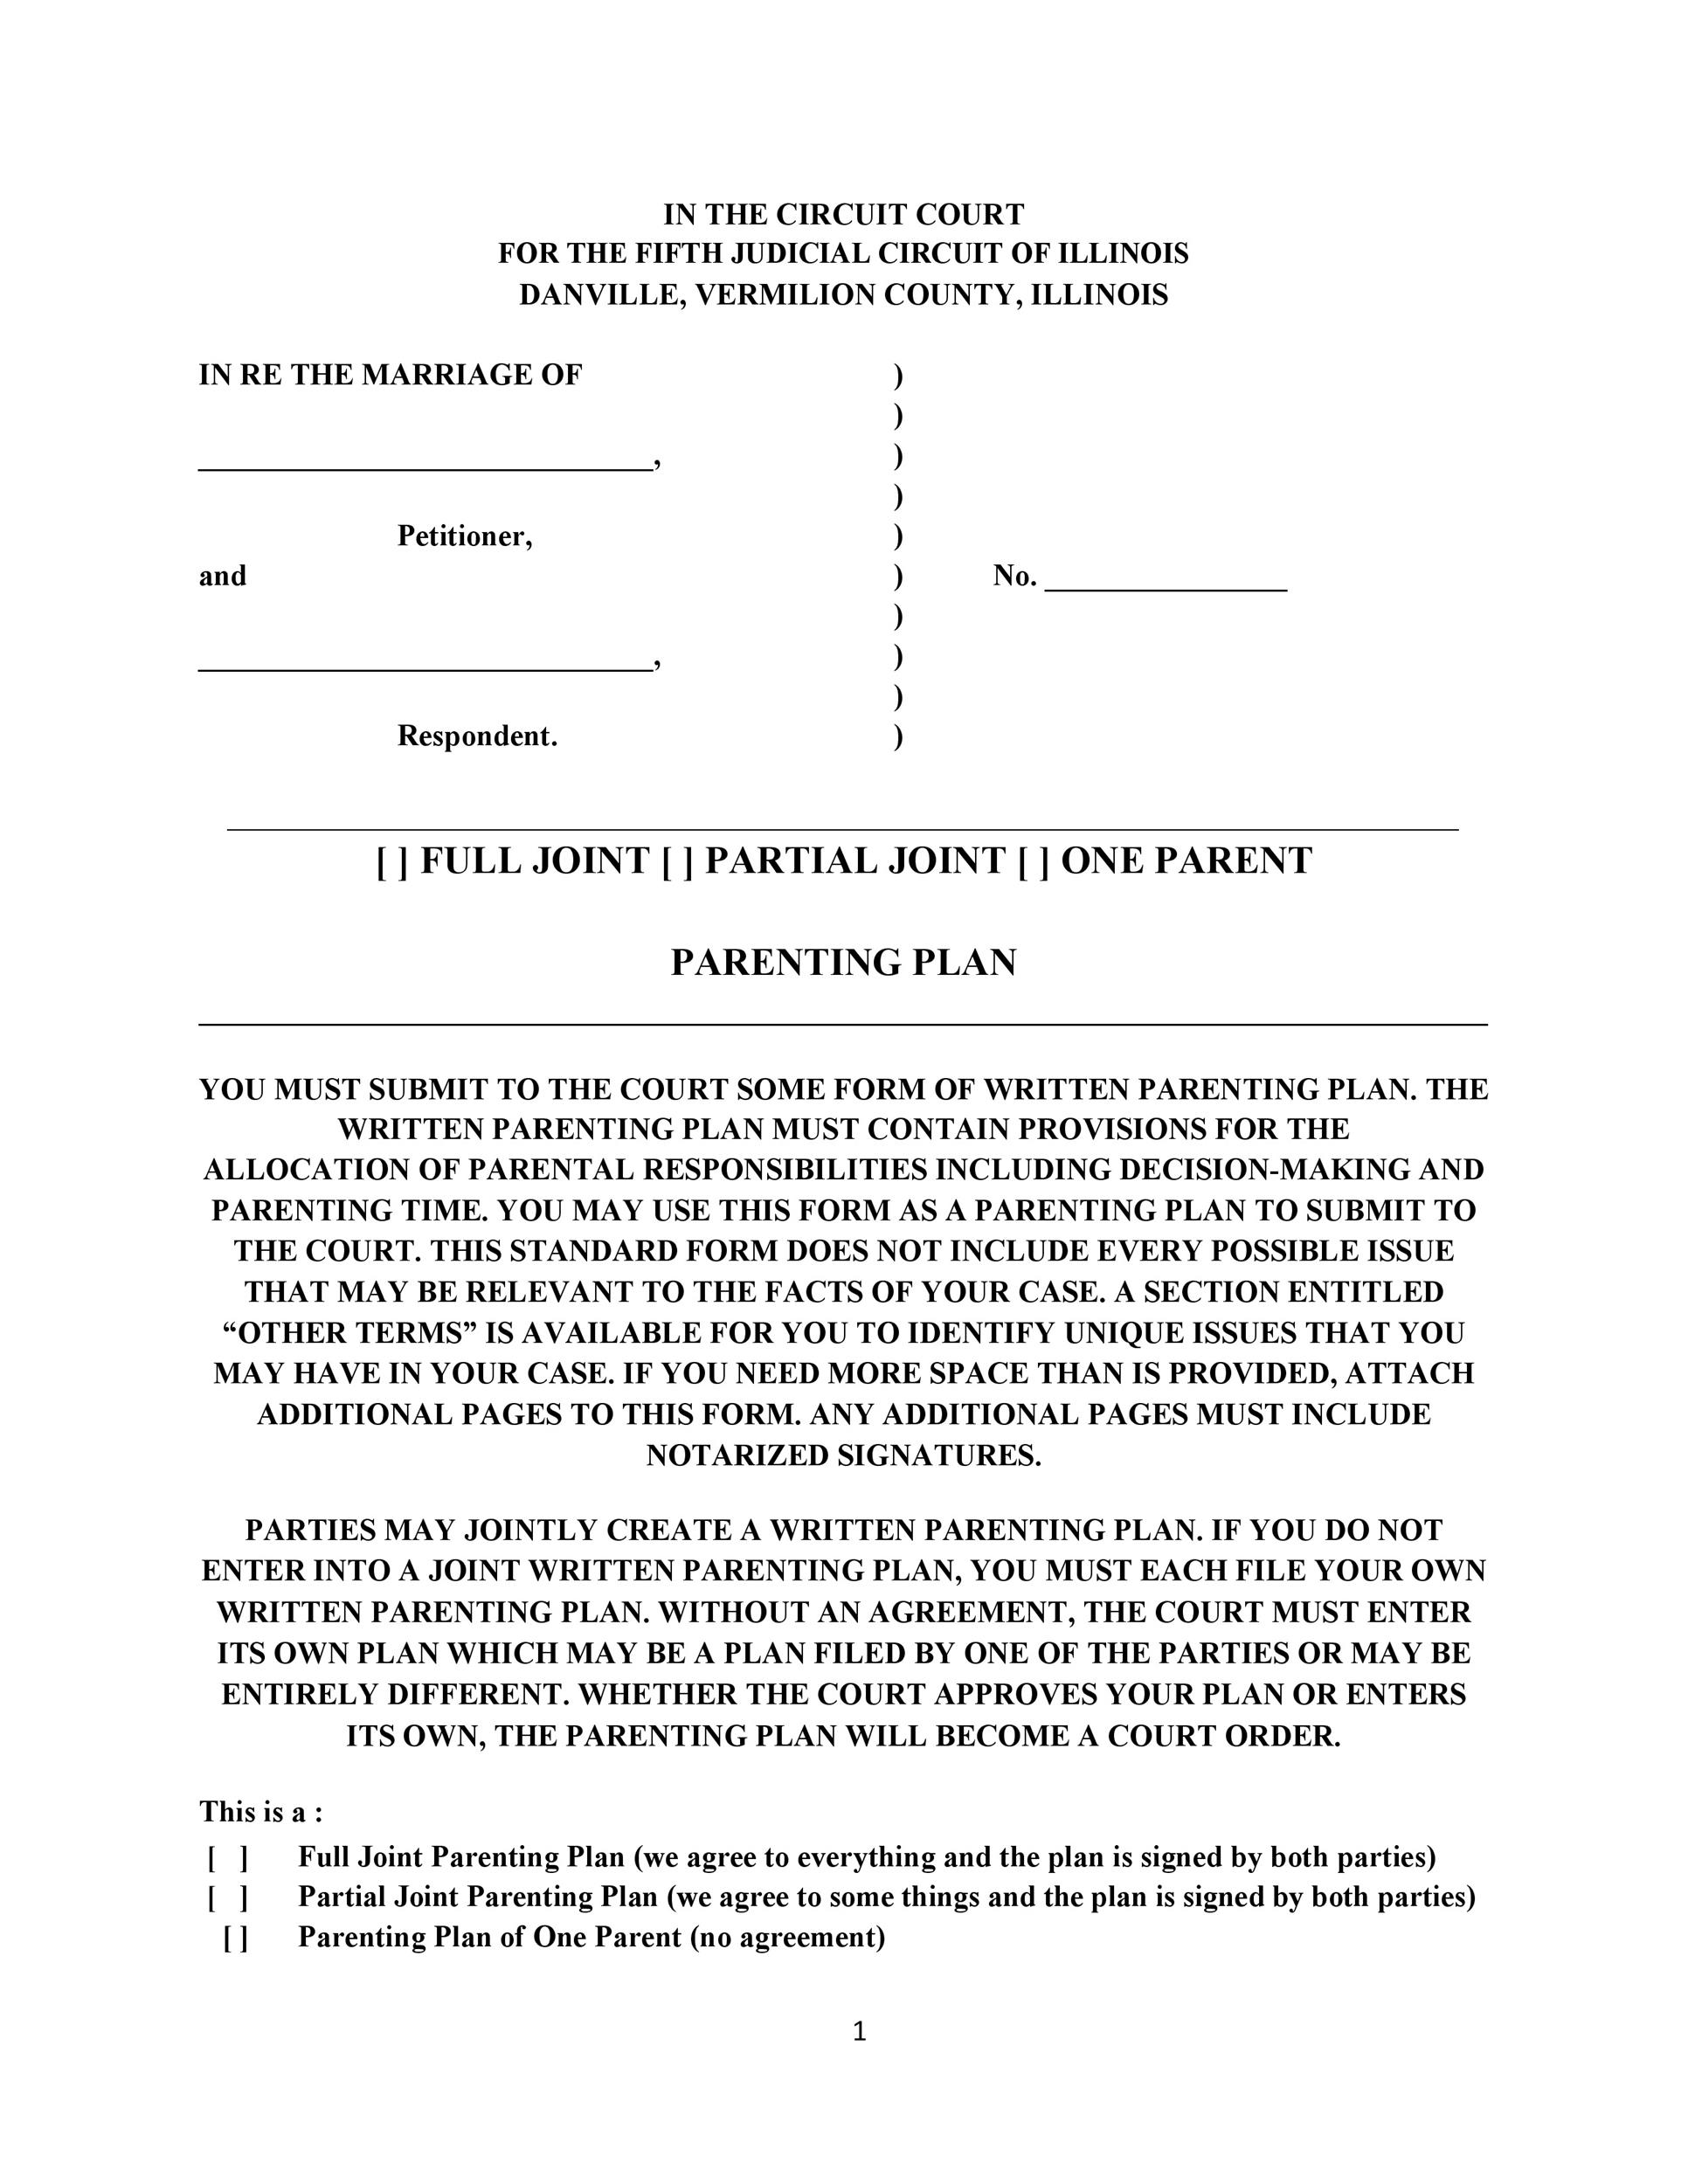 Parenting Plan Agreement Template from templatelab.com